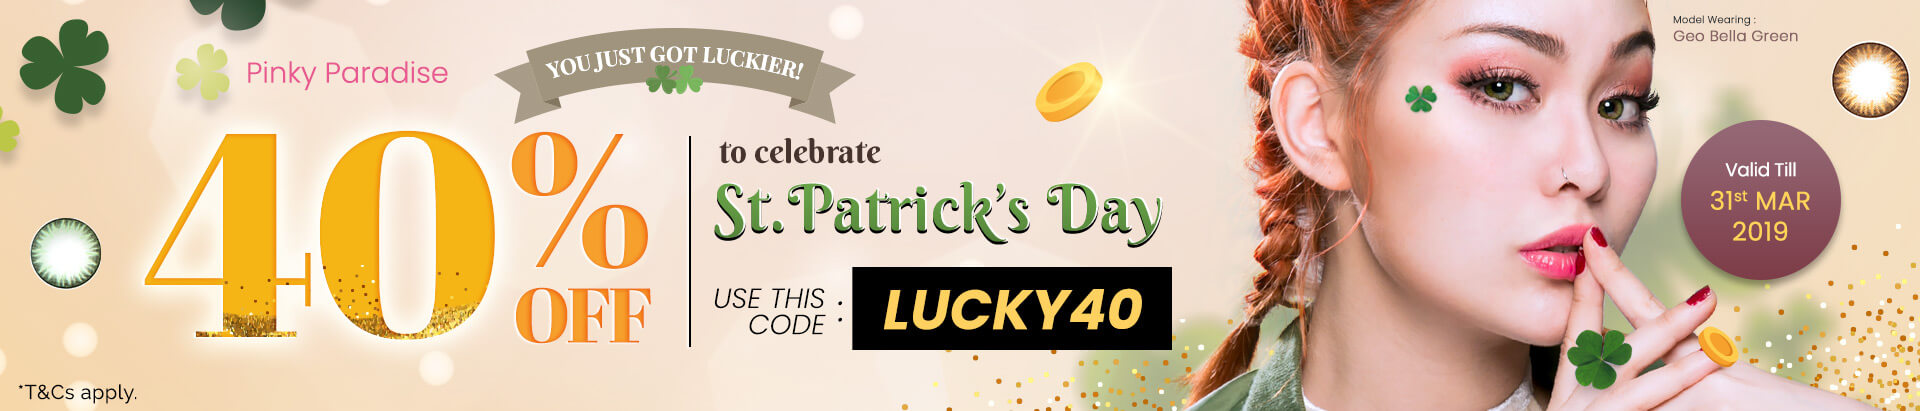 St. Patrick's Day 30% OFF with No minimum spending